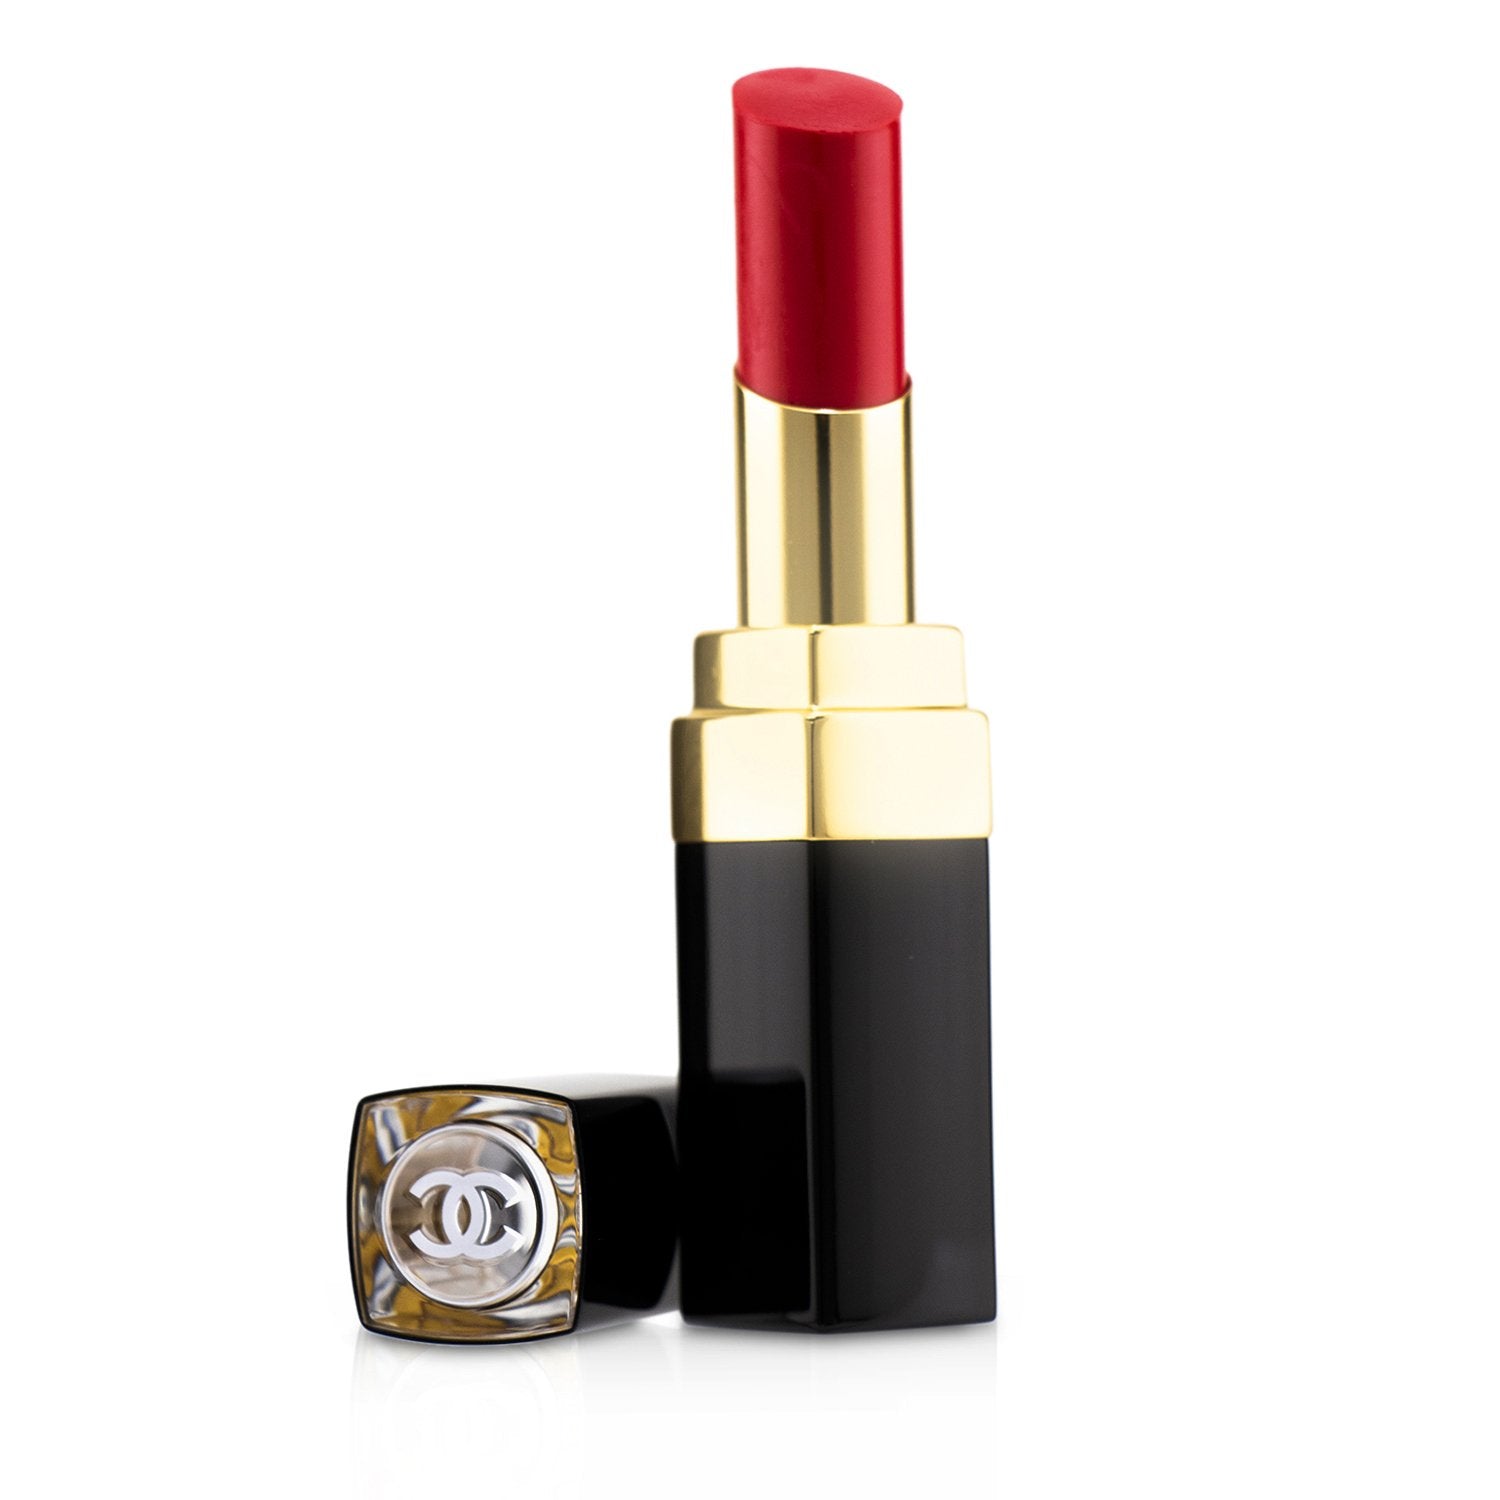 CHANEL - ROUGE COCO FLASH - HYDRATING VIBRANT SHINE LIP COLOUR - 116 EASY -  NEW